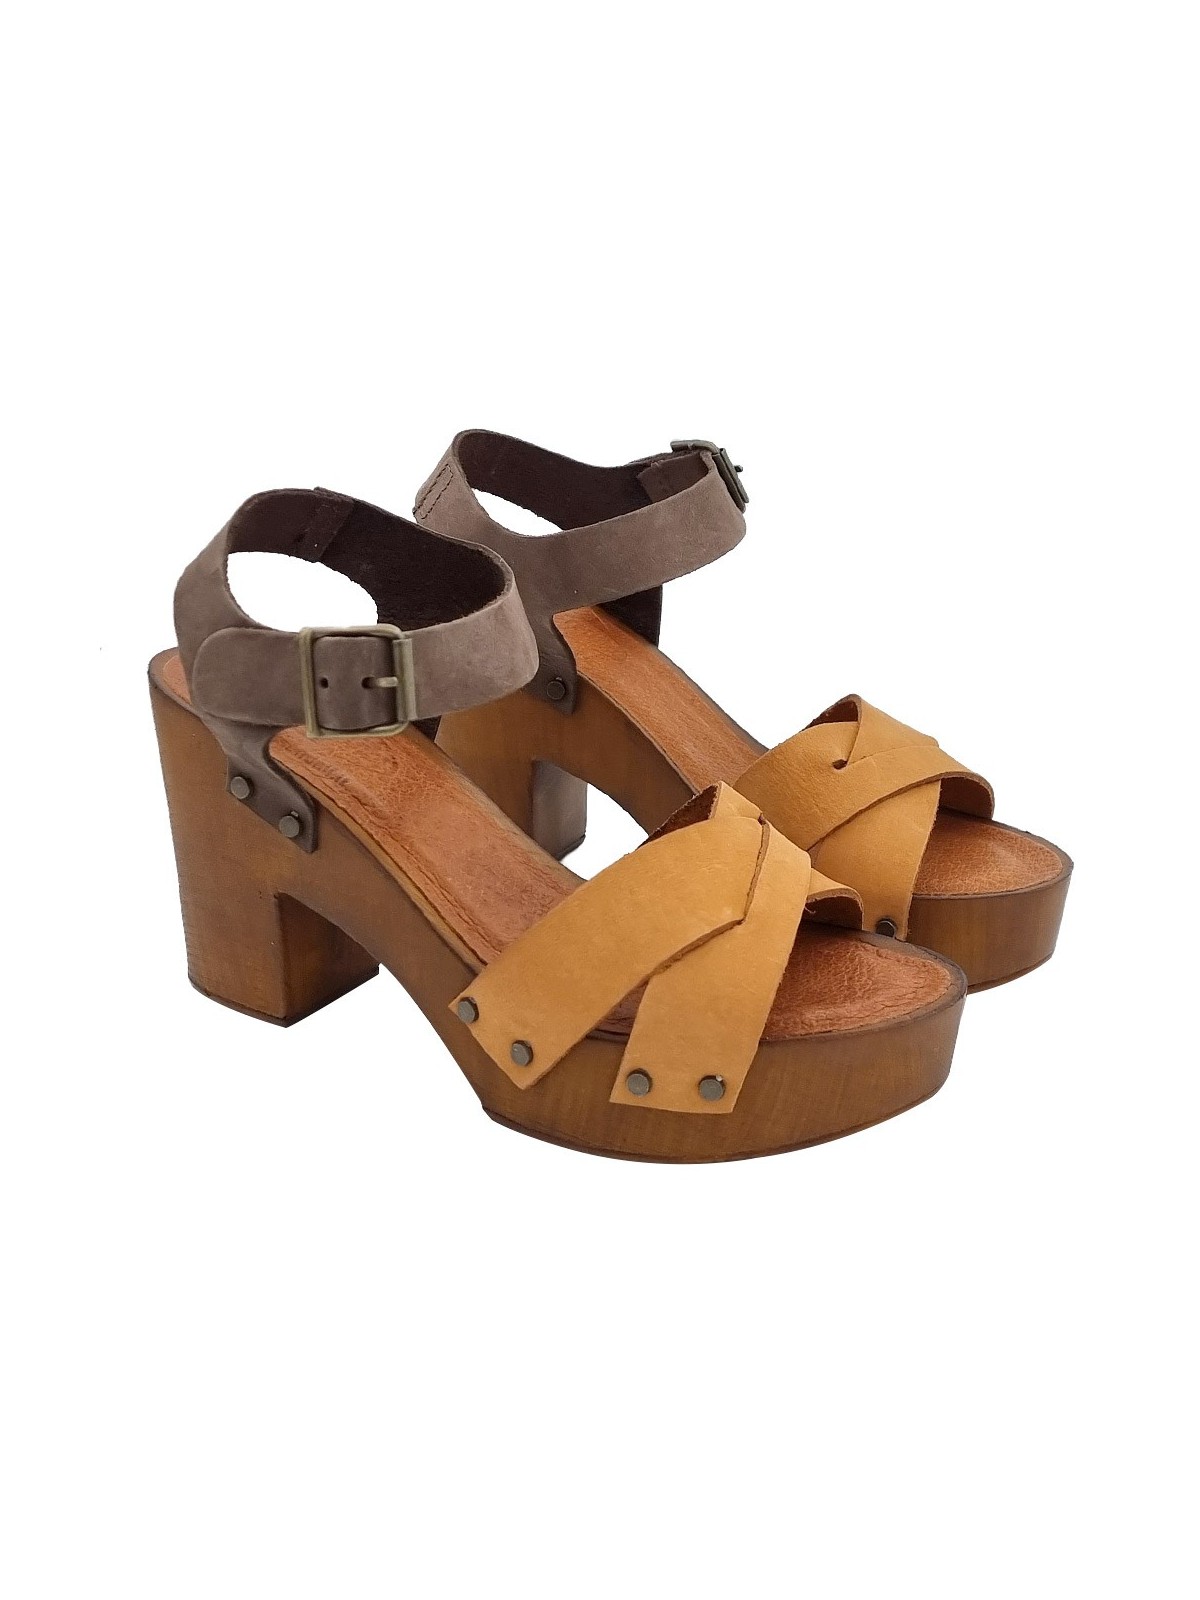 LEATHER-COLORED SANDALS WITH CROSSED BANDS AND HEEL 9